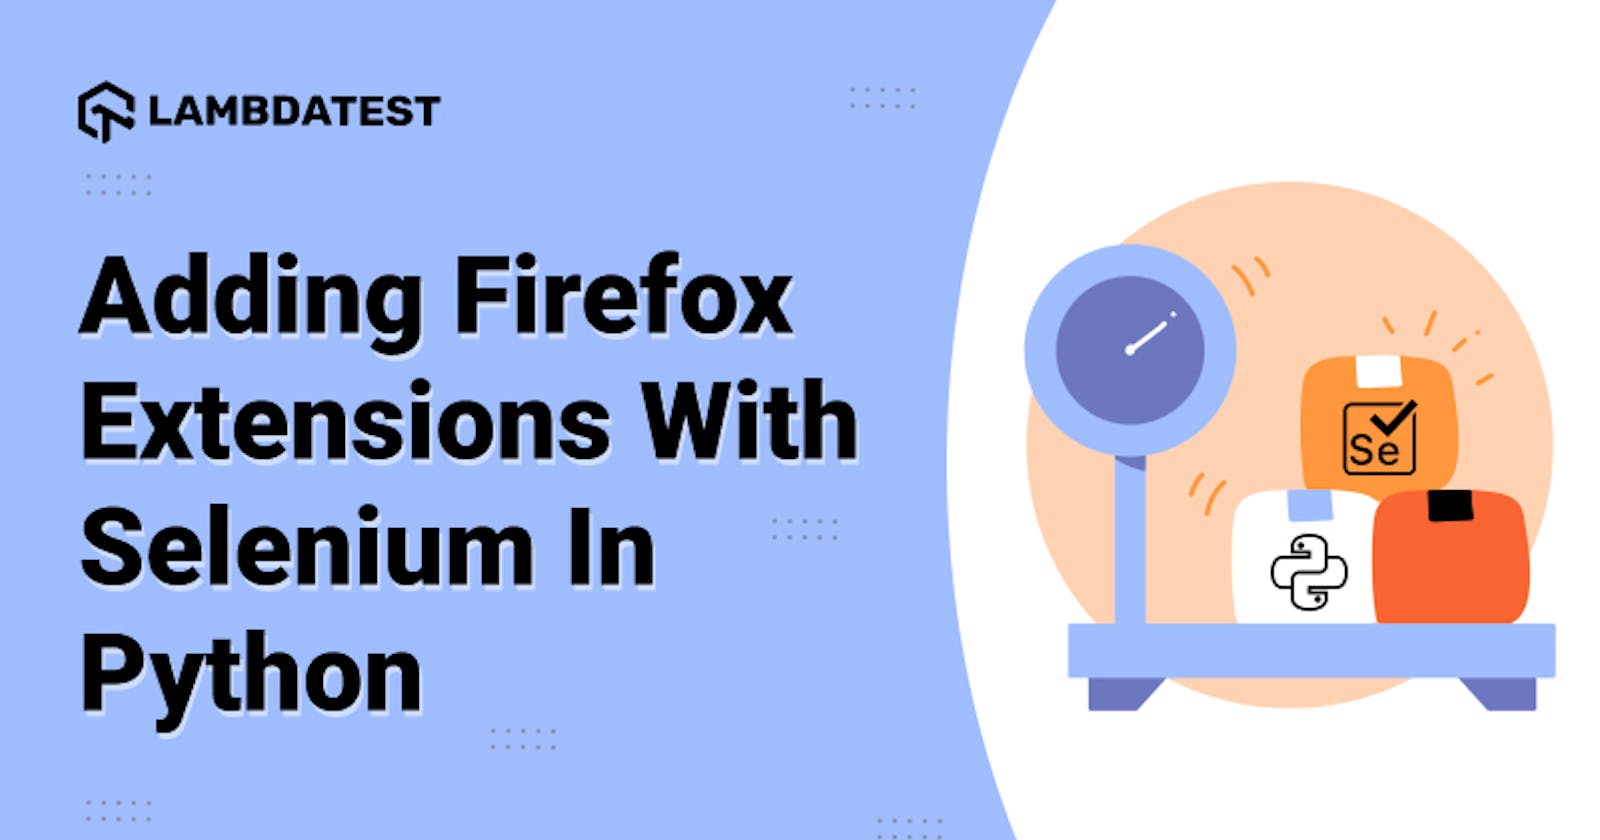 Adding Firefox Extensions With Selenium In Python